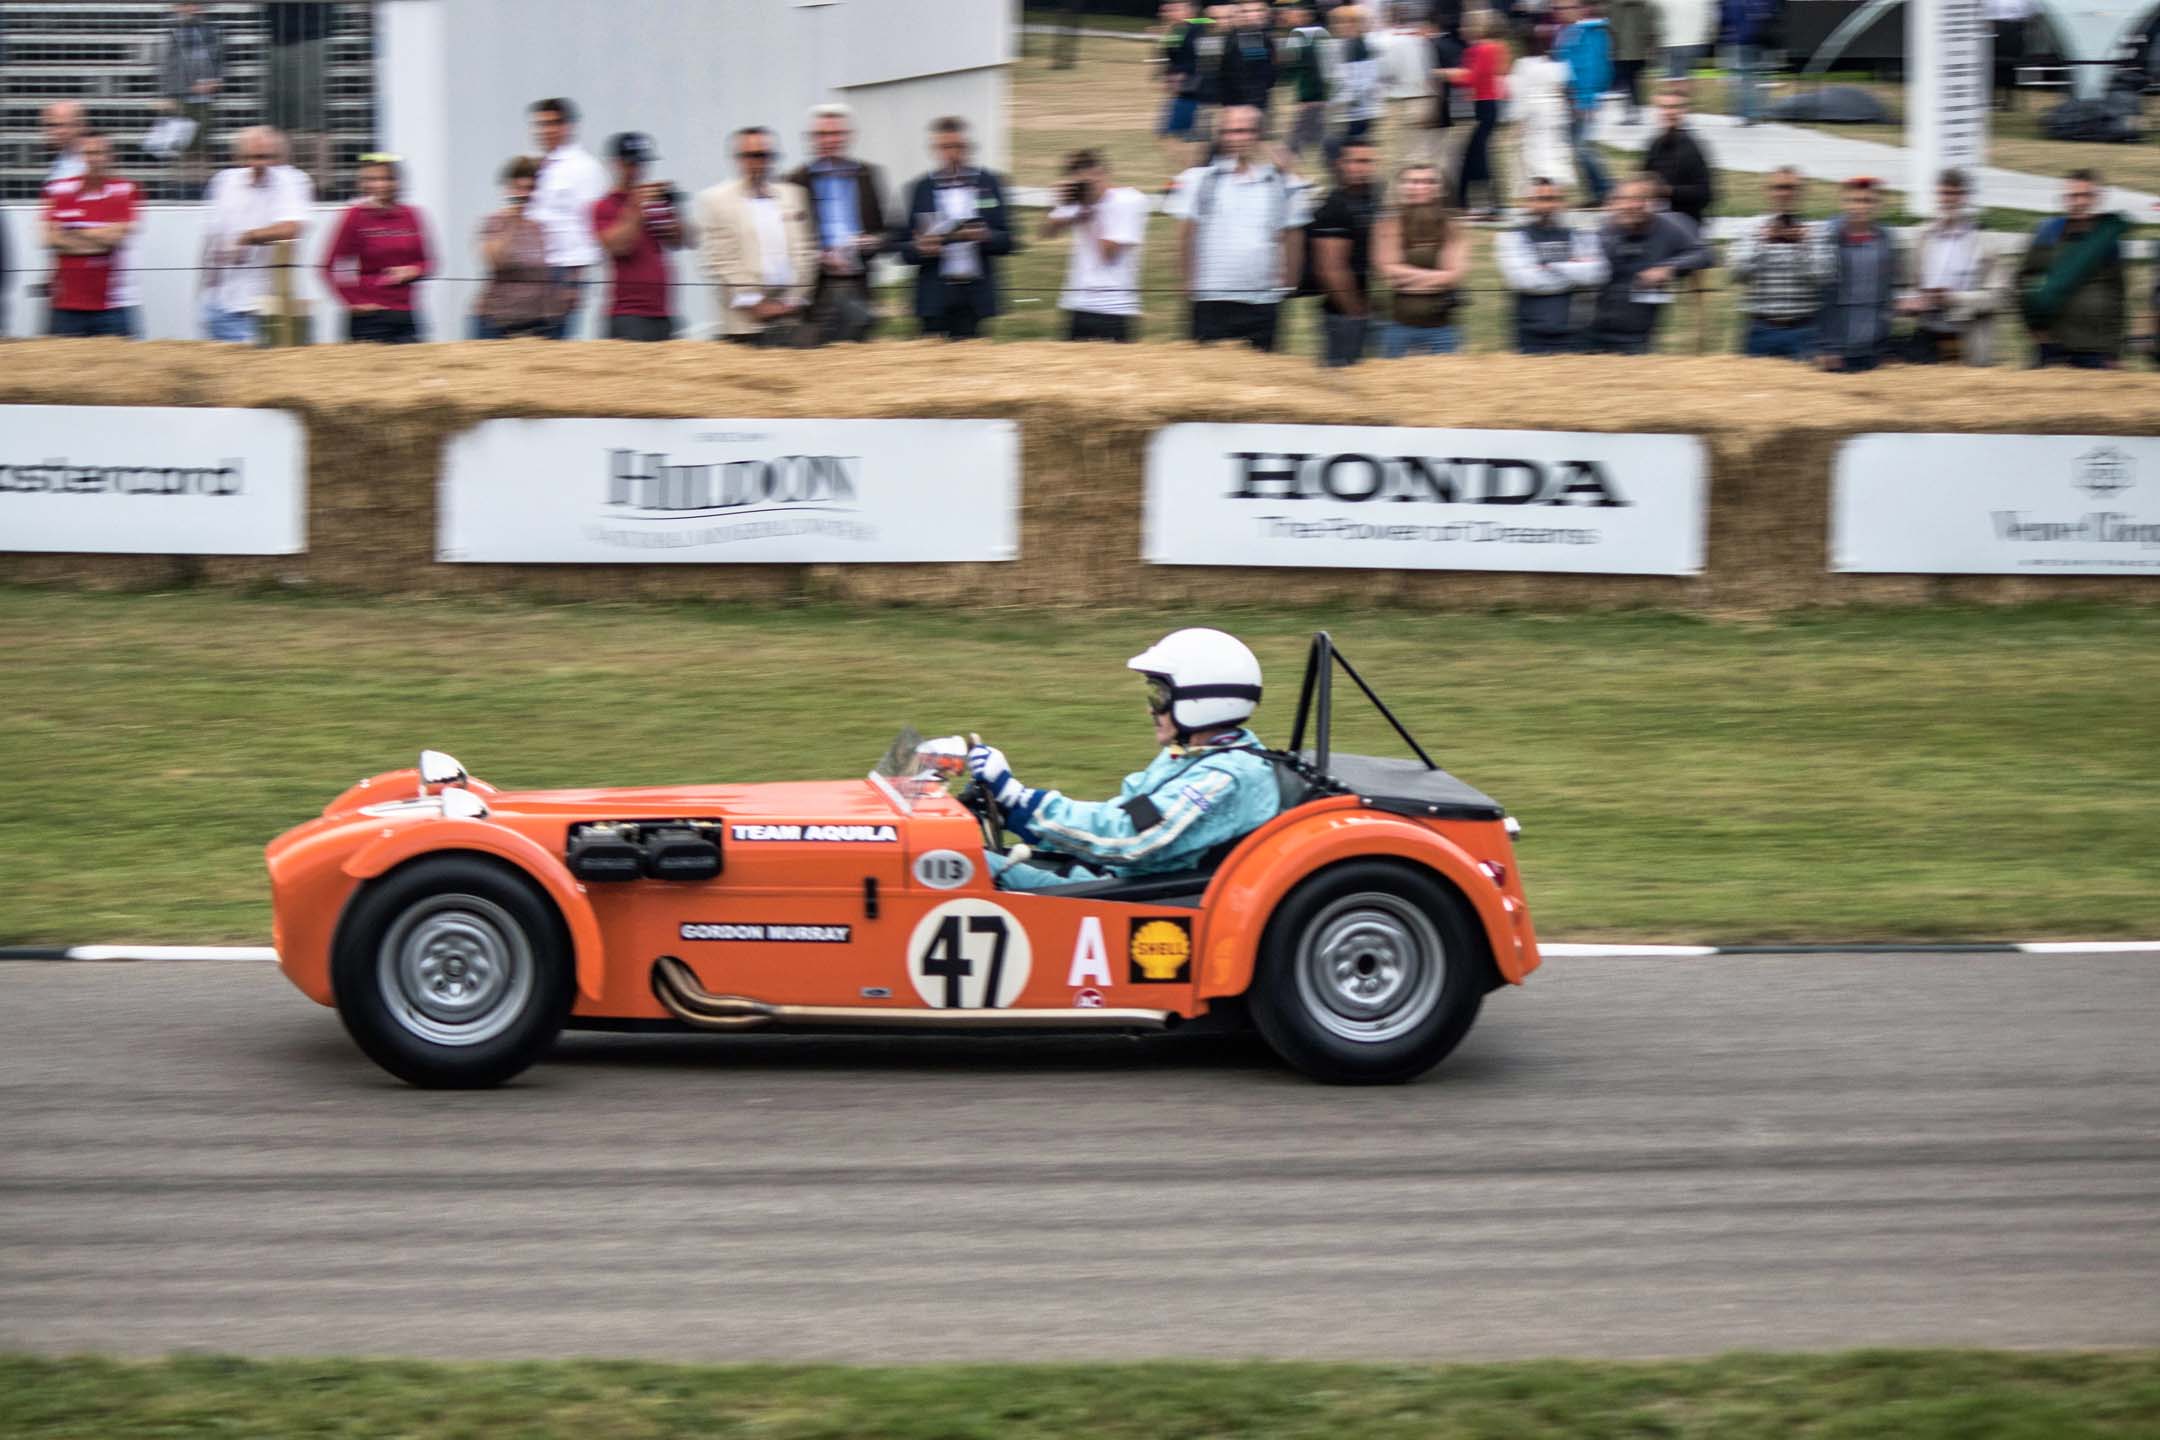 Noted car South African designer Gordon Murray goes up the hill in a Lotus Super Seven clone he built in his youth. Famous for many Brabham Formula One builds and the McLaren F1, Murray was surrounded by many of his own designs on the day.